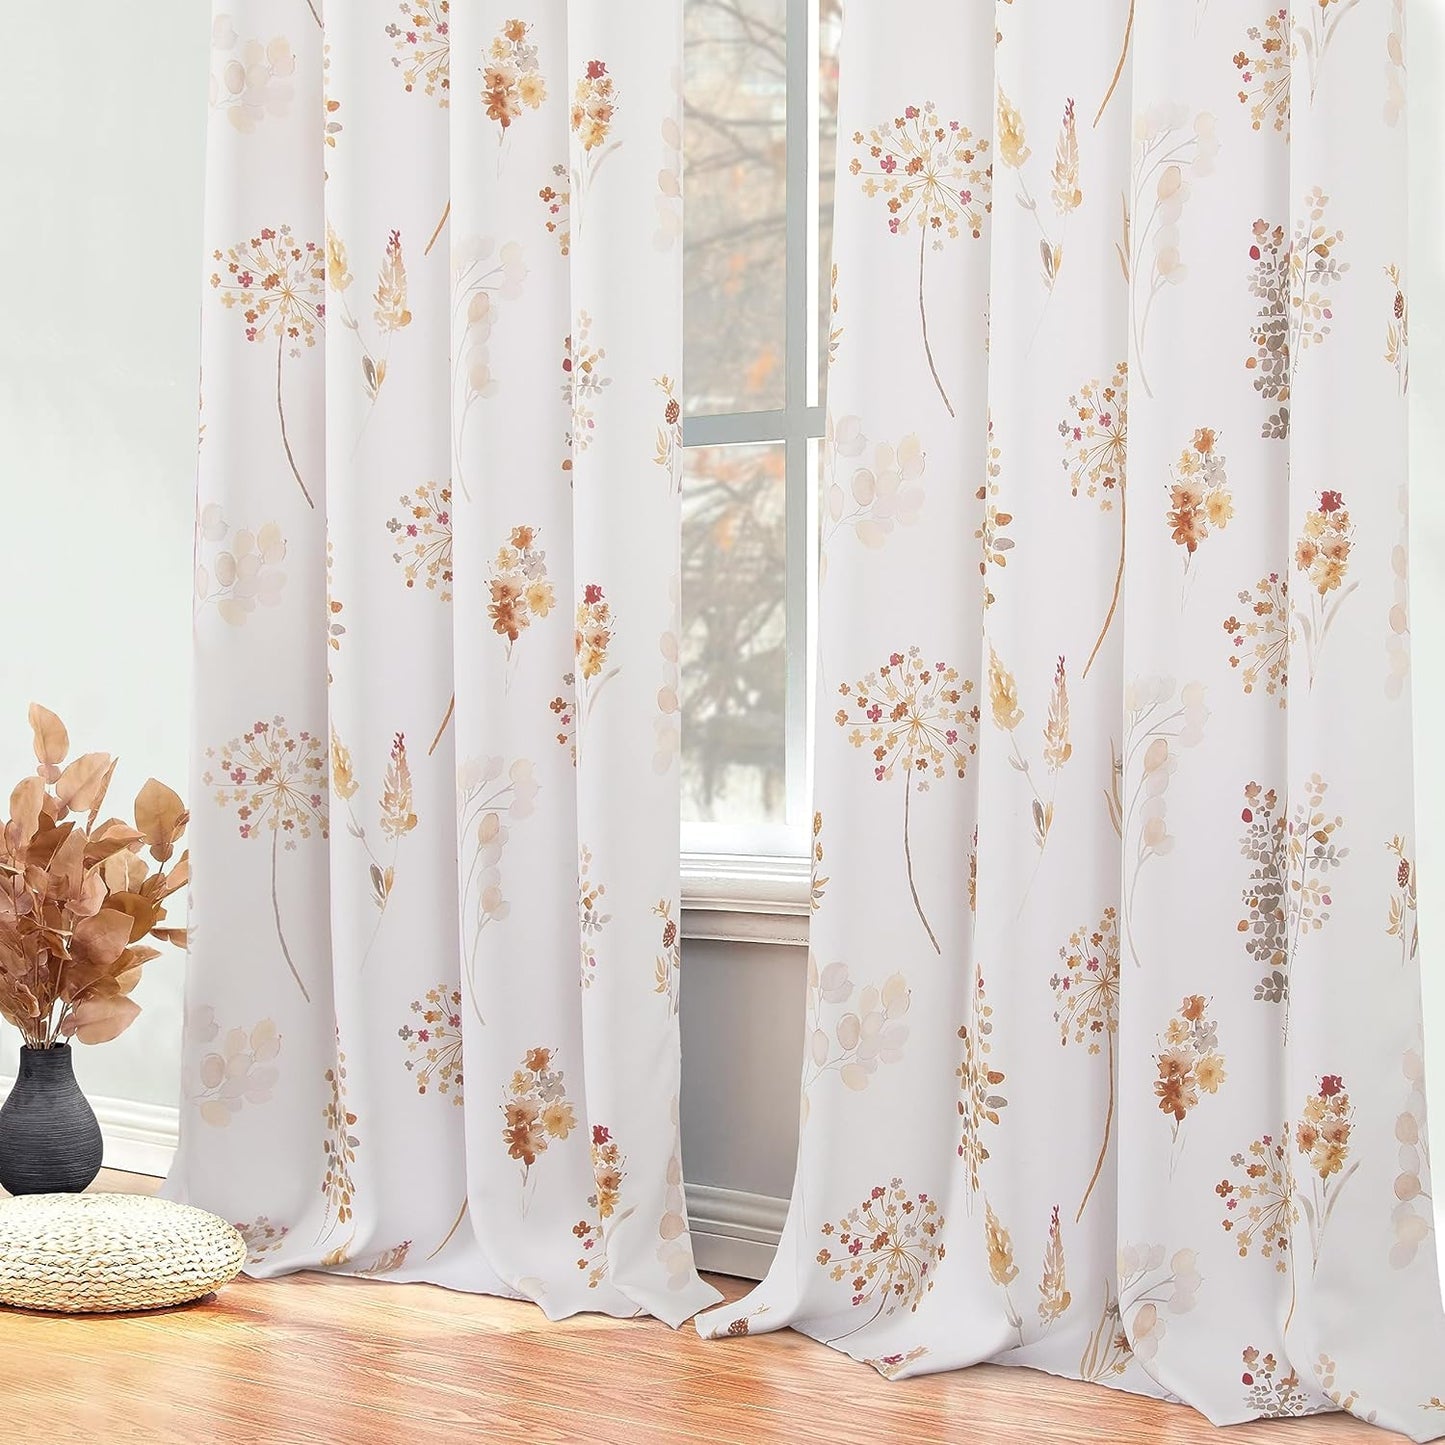 XTMYI 63 Inch Length Sage Green Window Curtains for Bedroom 2 Panels,Room Darkening Watercolor Floral Leaves 80% Blackout Flowered Printed Curtains for Living Room with Grommet,1 Pair Set  XTMYI Rust  Brown 52"X84" 